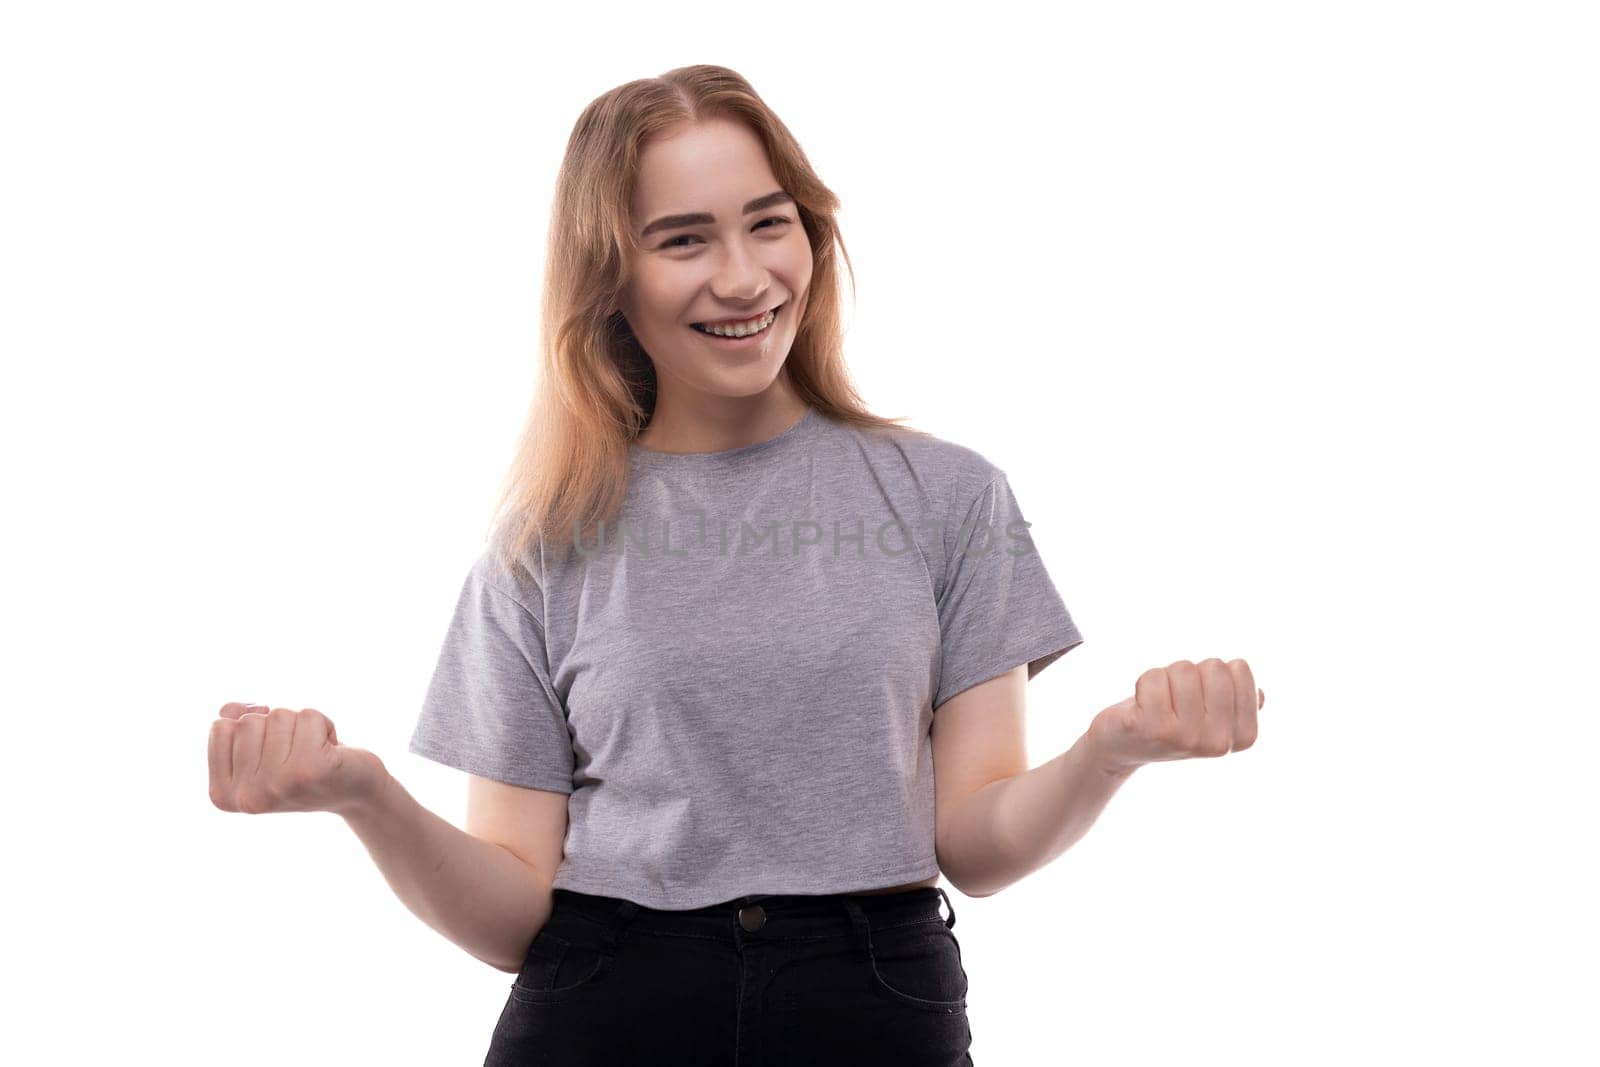 Portrait of a charming teenage girl with braces in a gray T-shirt on a white background.